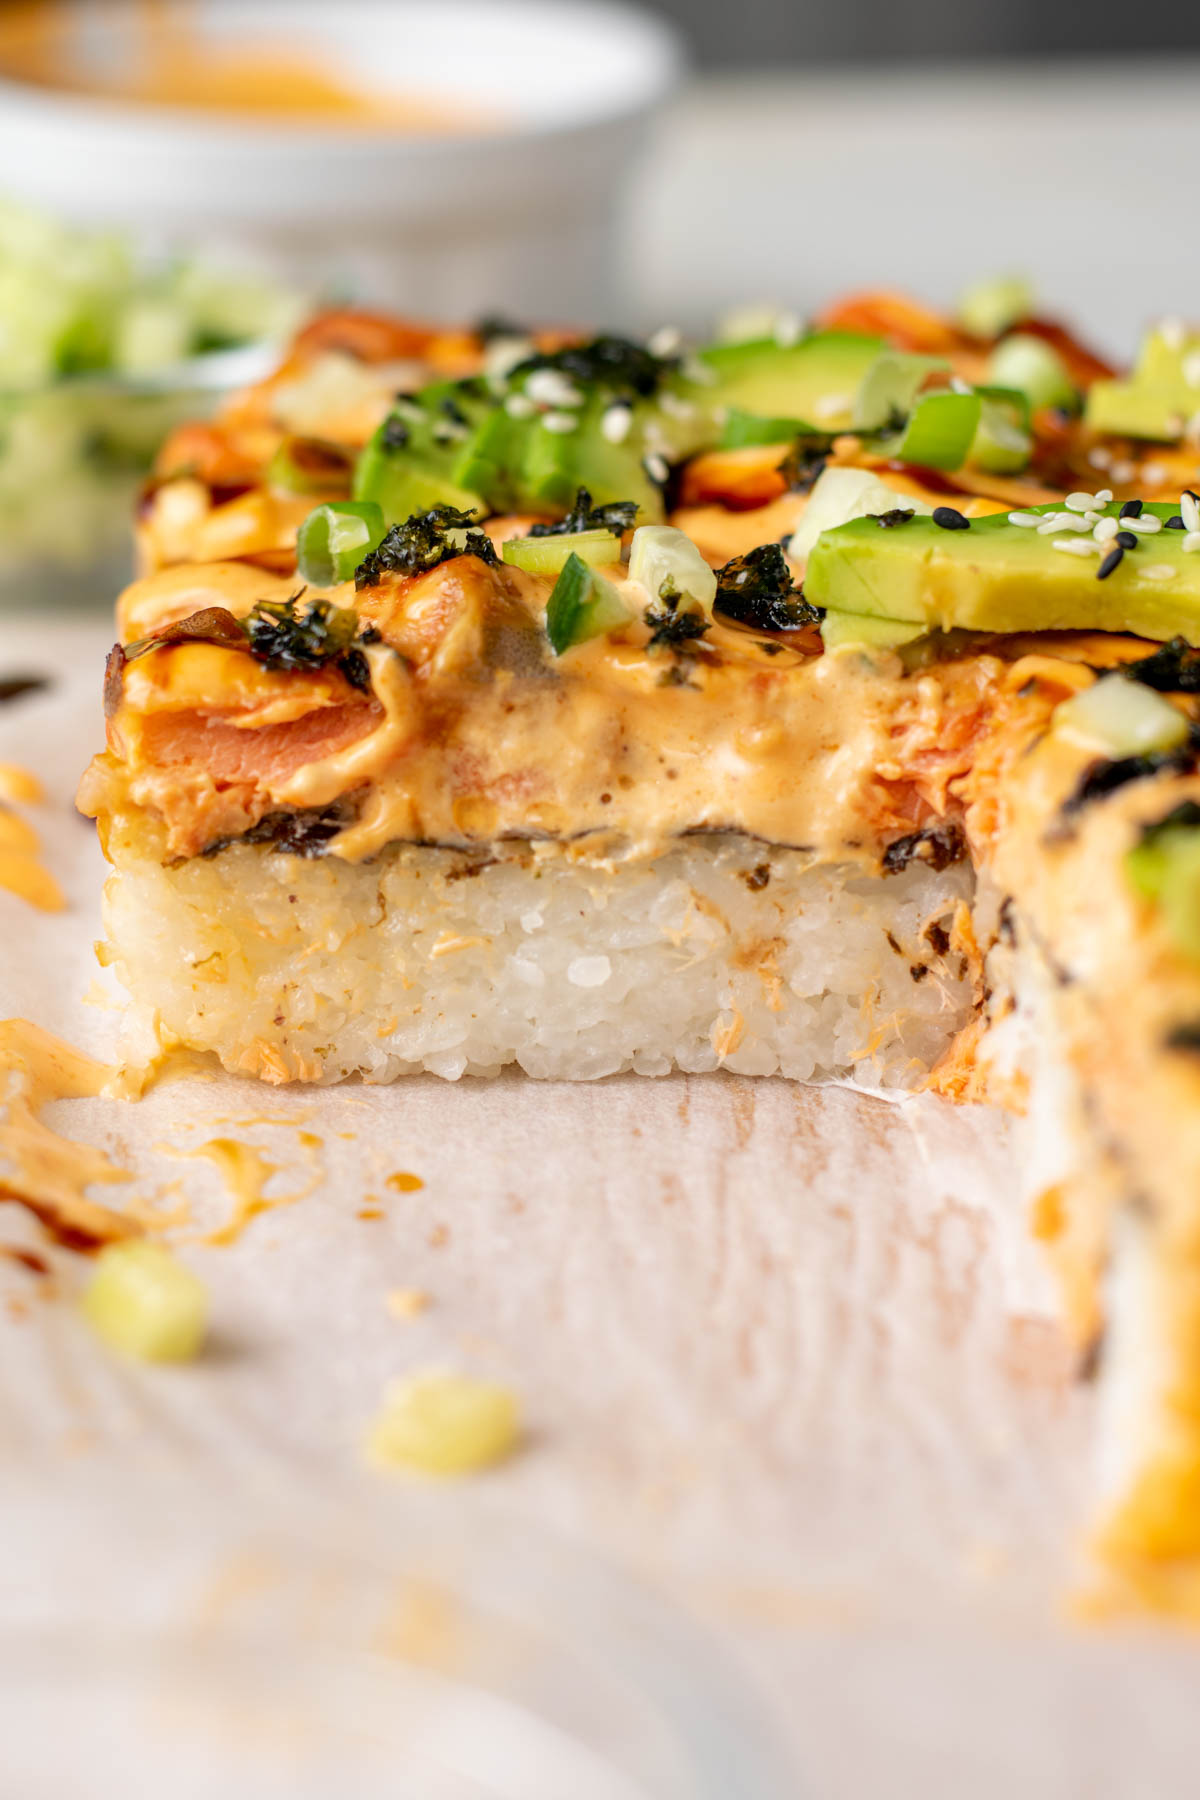 cross section view of salmon sushi bake.